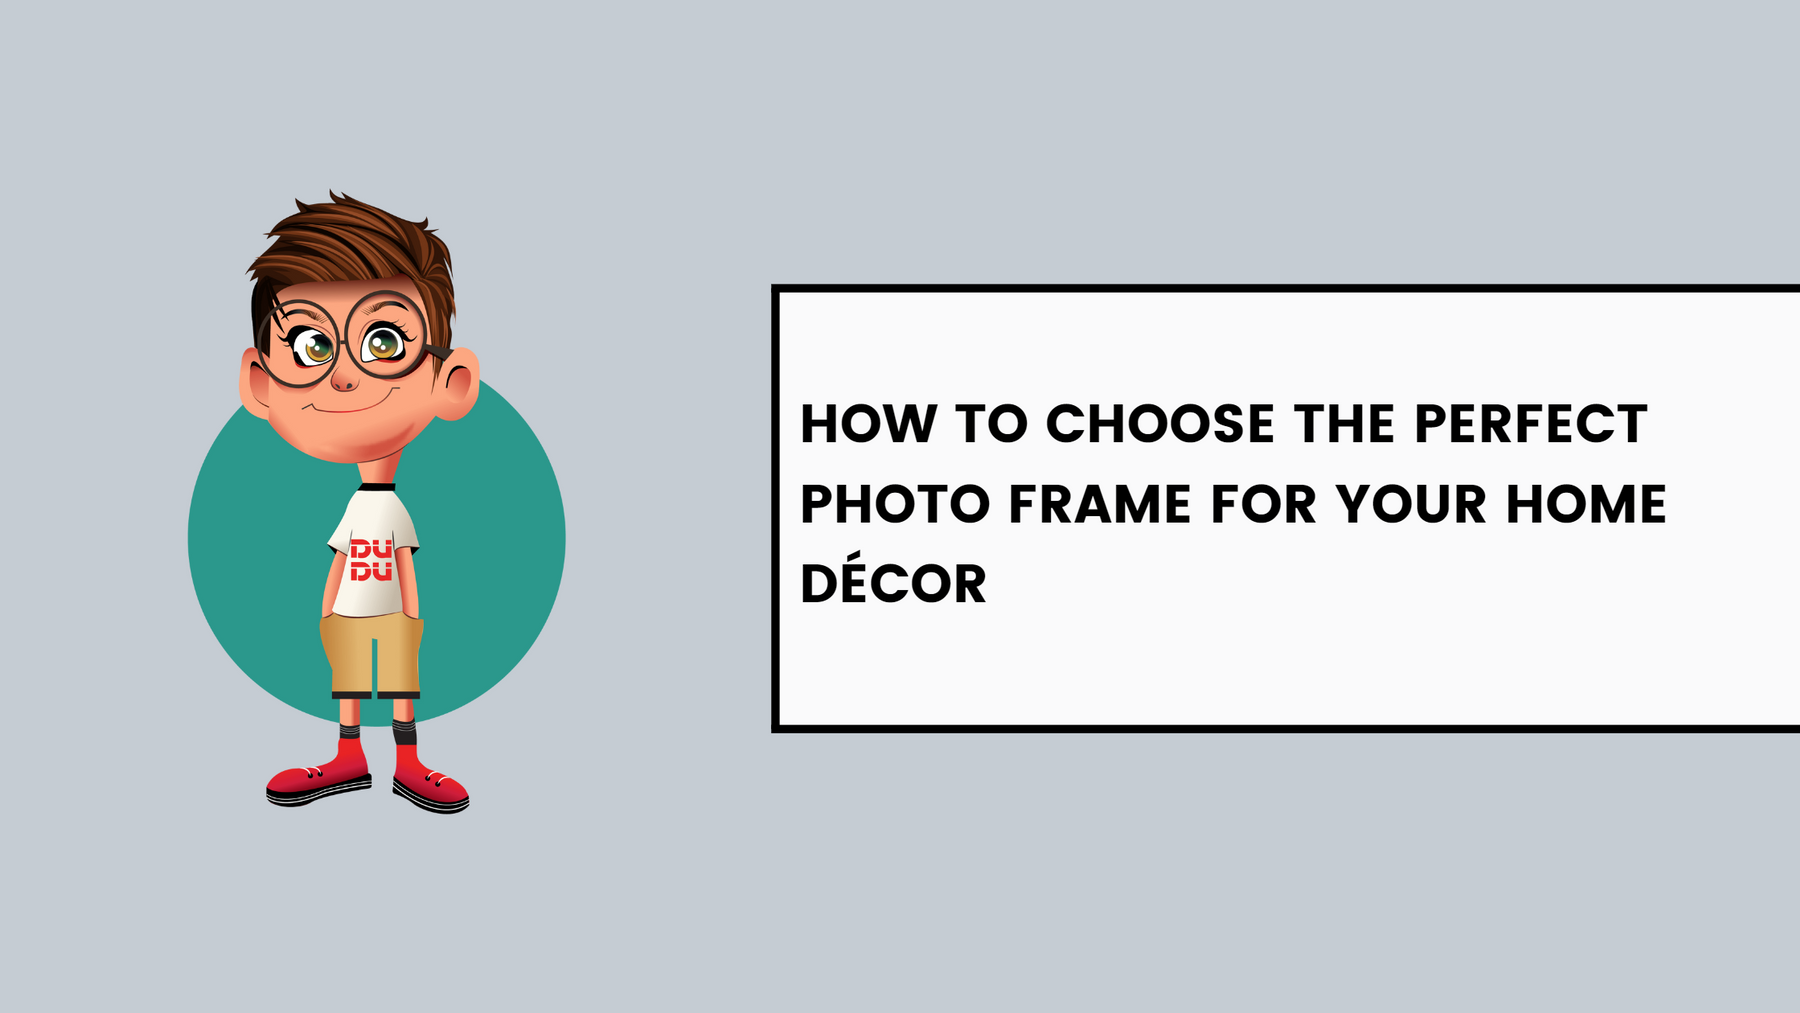 How to Choose the Perfect Photo Frame for Your Home Décor